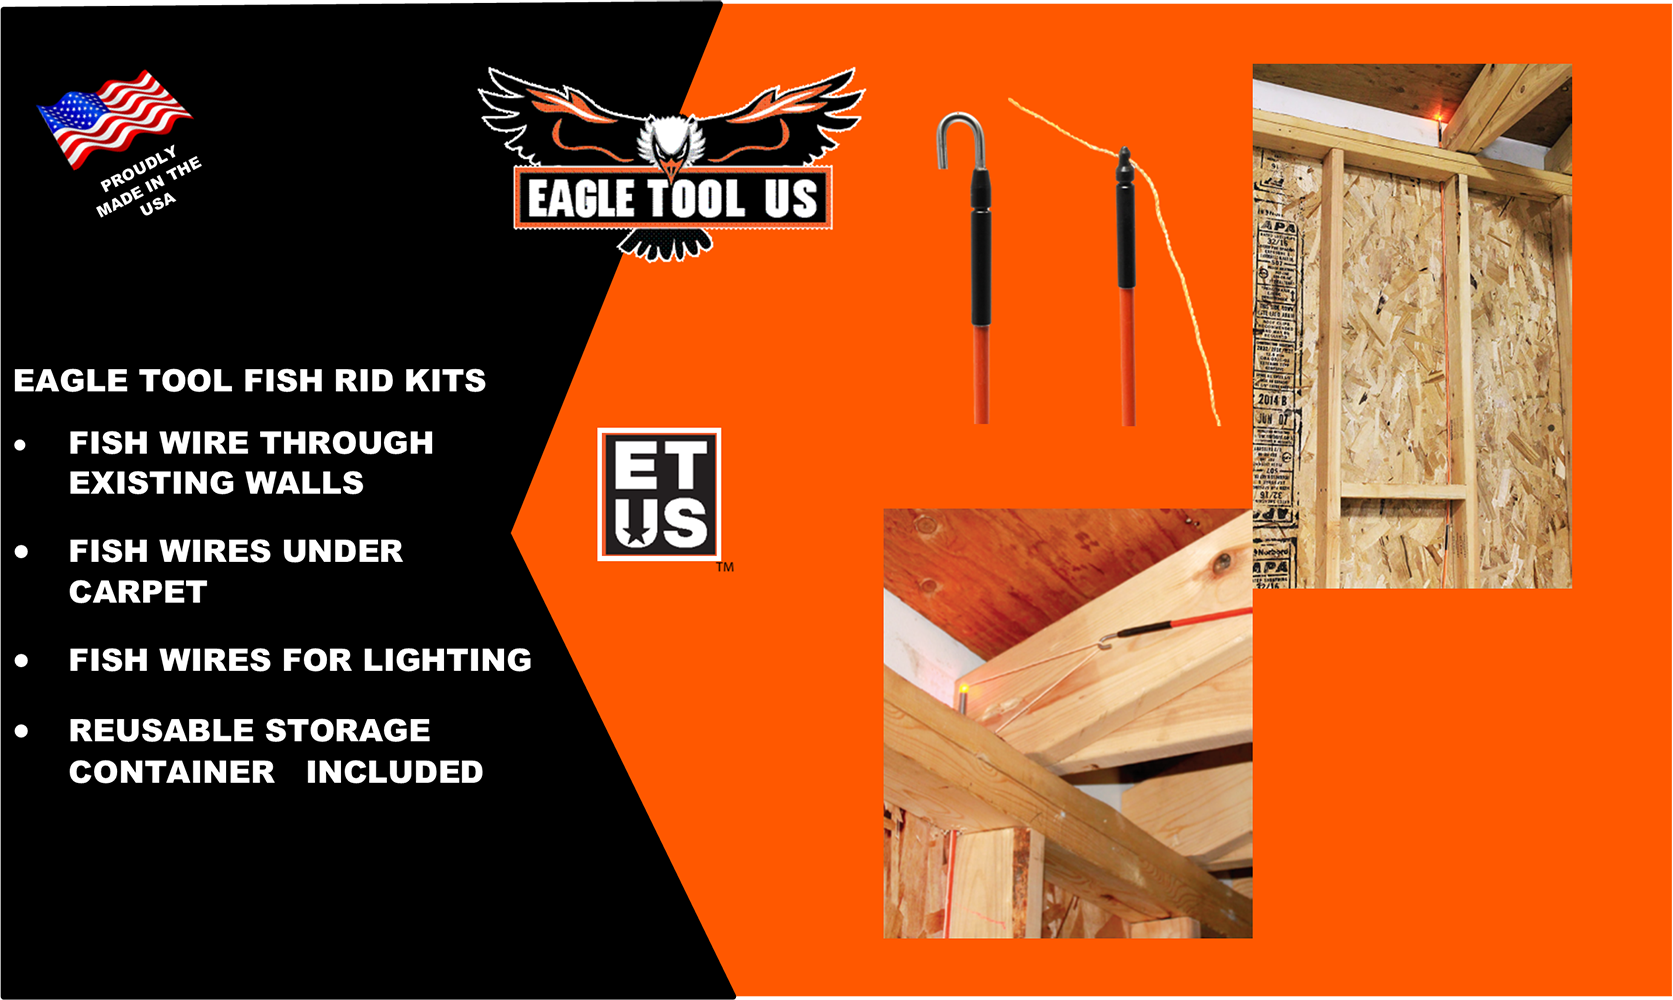 Eagle Tool US ETF2508 Wire and Cable Installer Fiberglass Fish Rod Kit, 8-Foot Assembled Length, Made in The USA